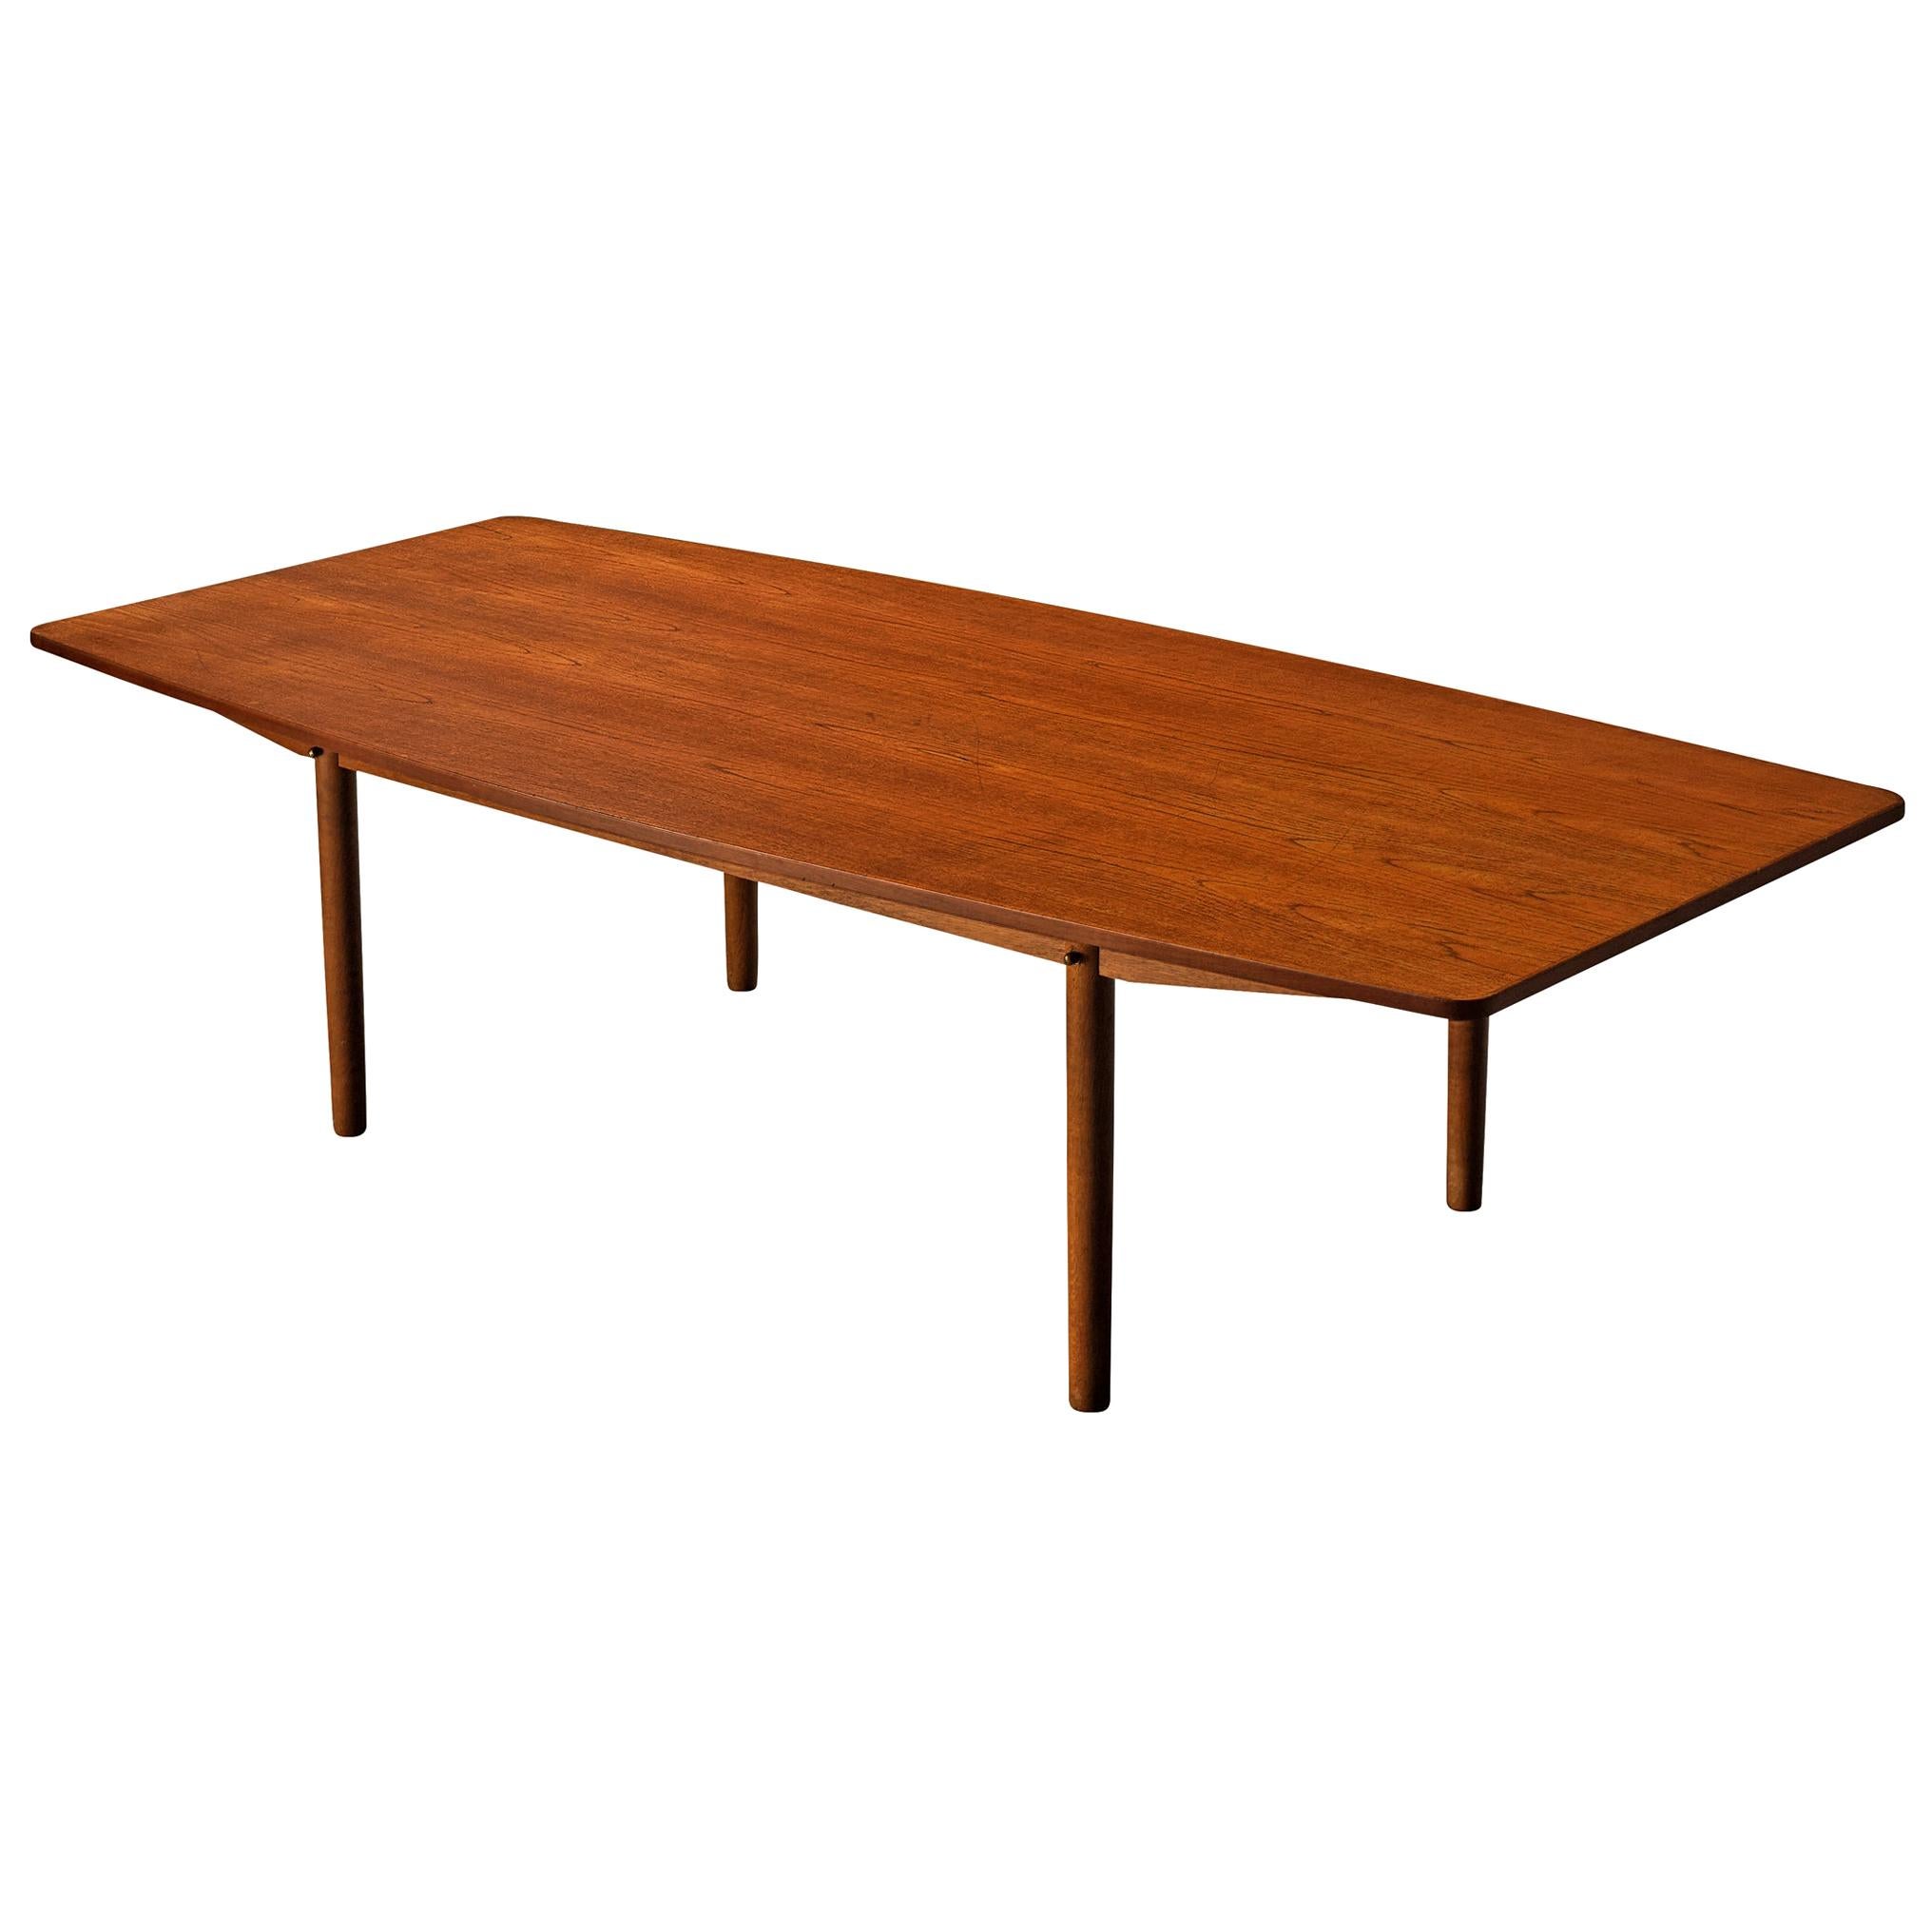 Danish Dining Table in Teak with Boat-Shaped Top